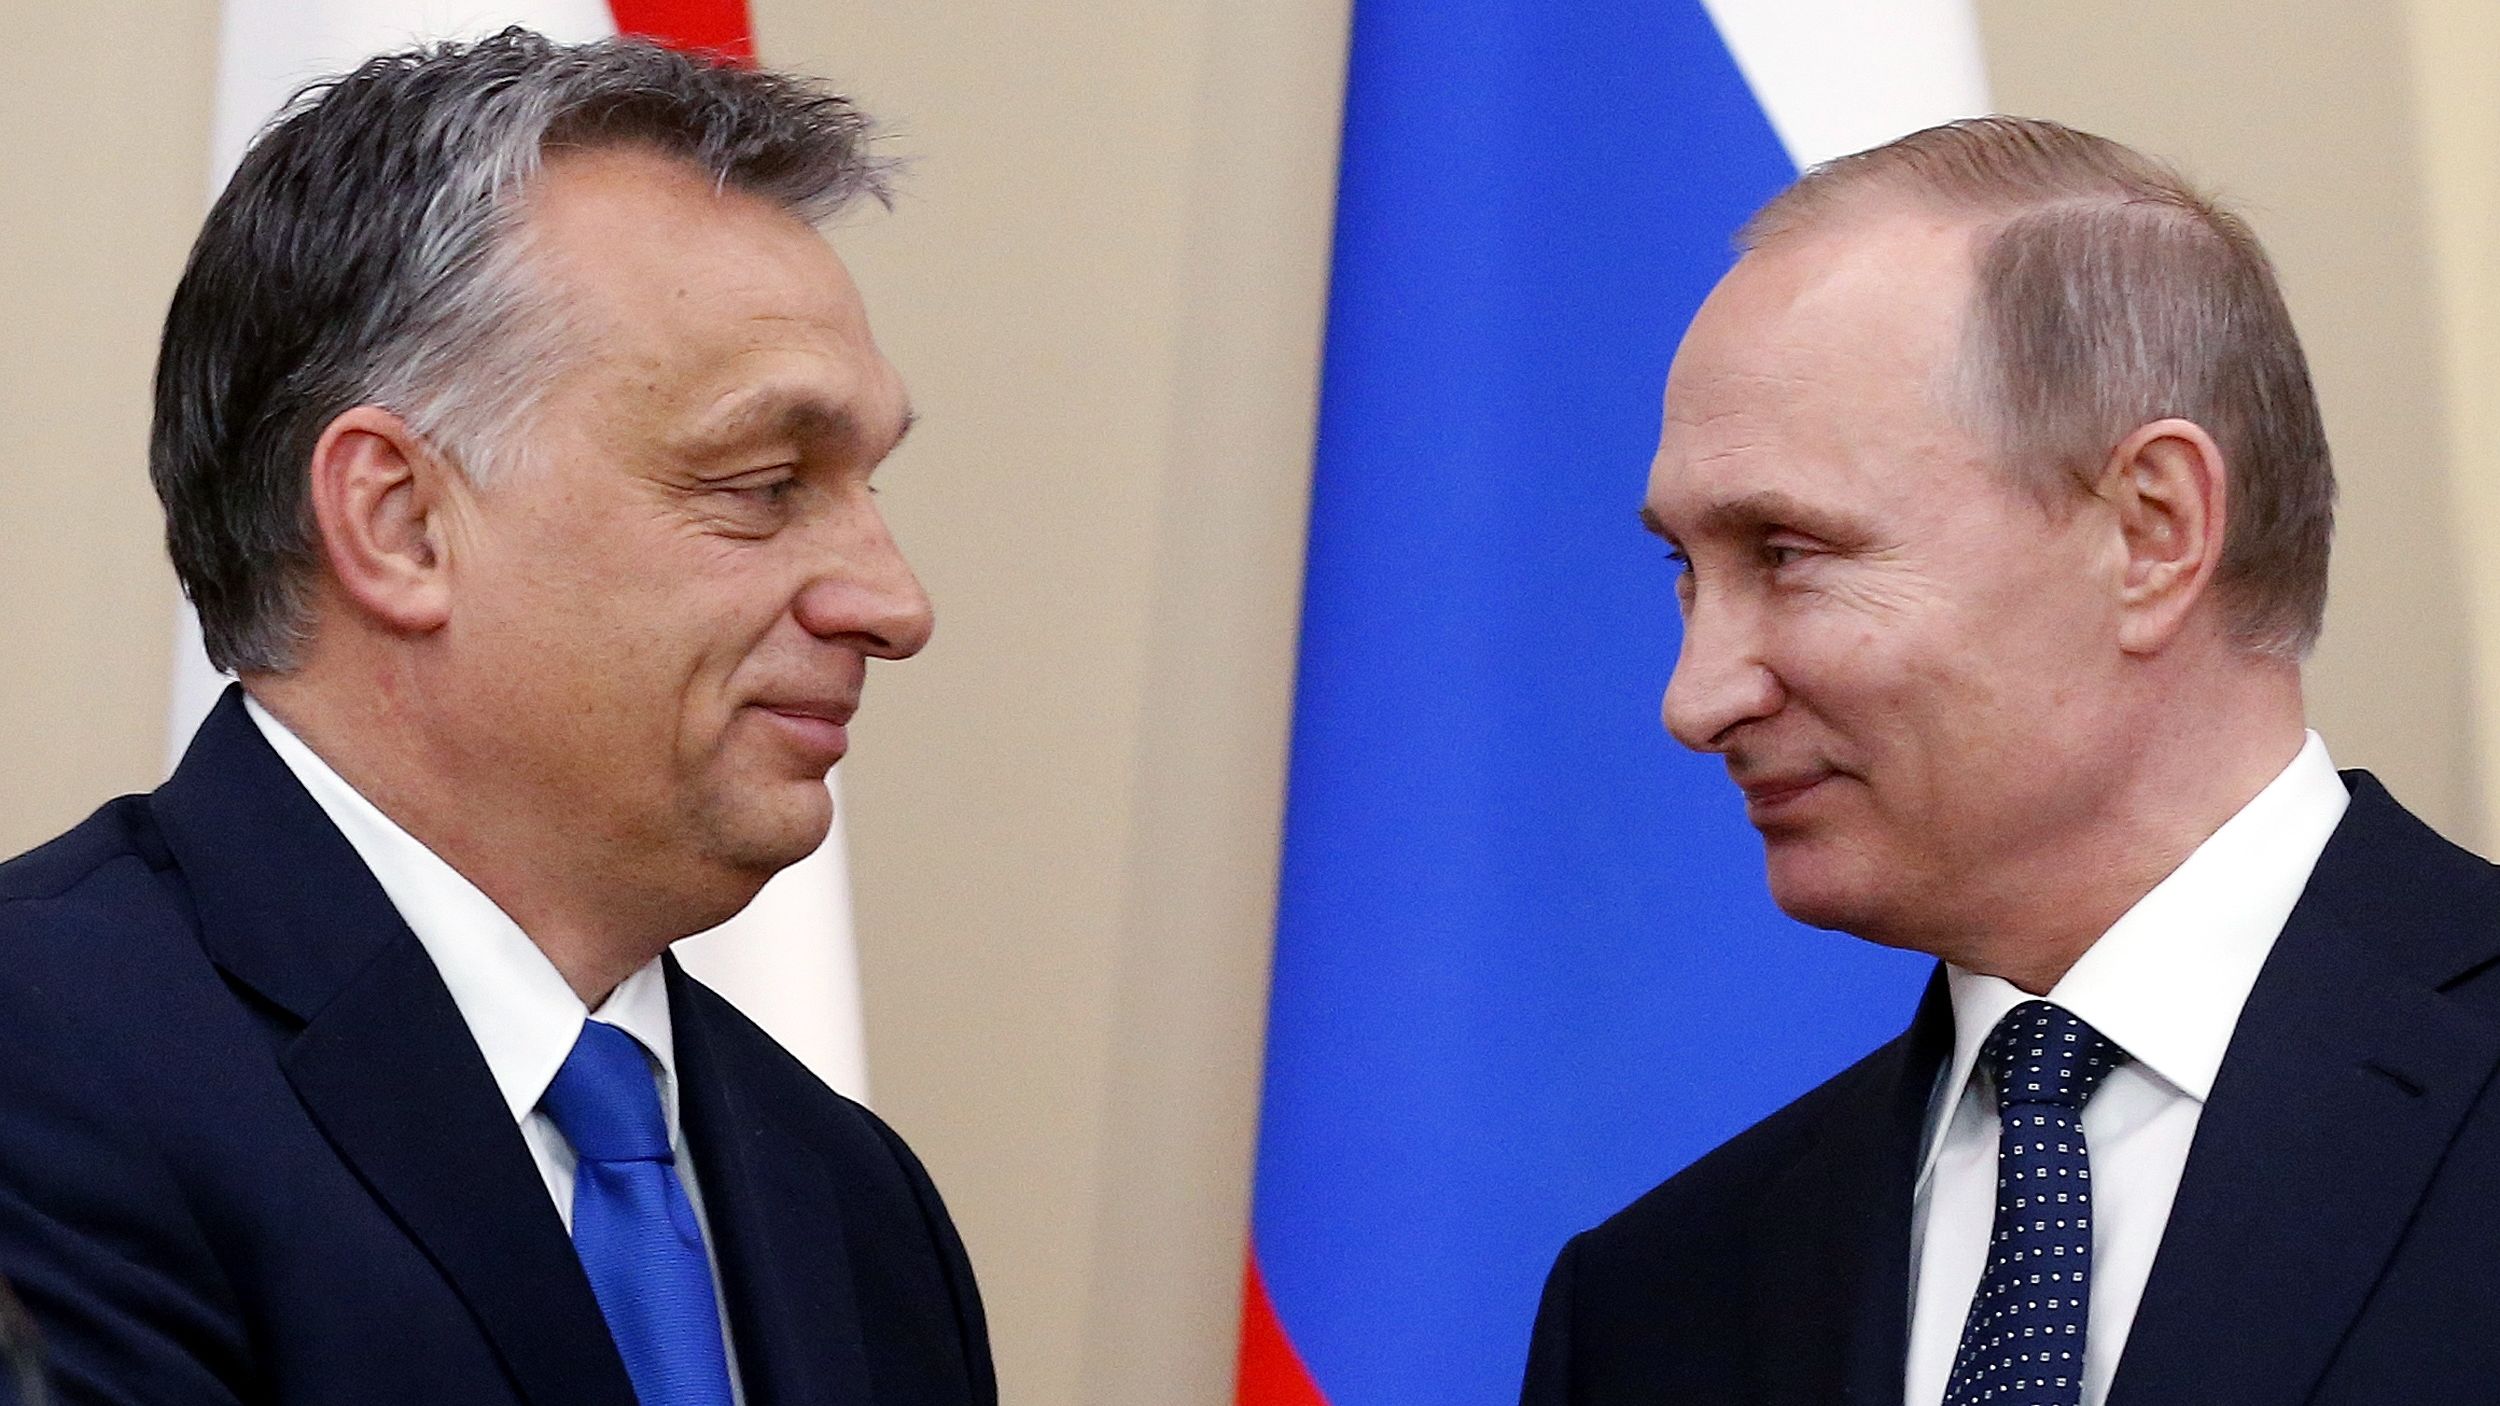 Viktor Orban (left) faces accusations of introducing repressive policies similar to those endorsed by Russian President Vladimir Putin (right).